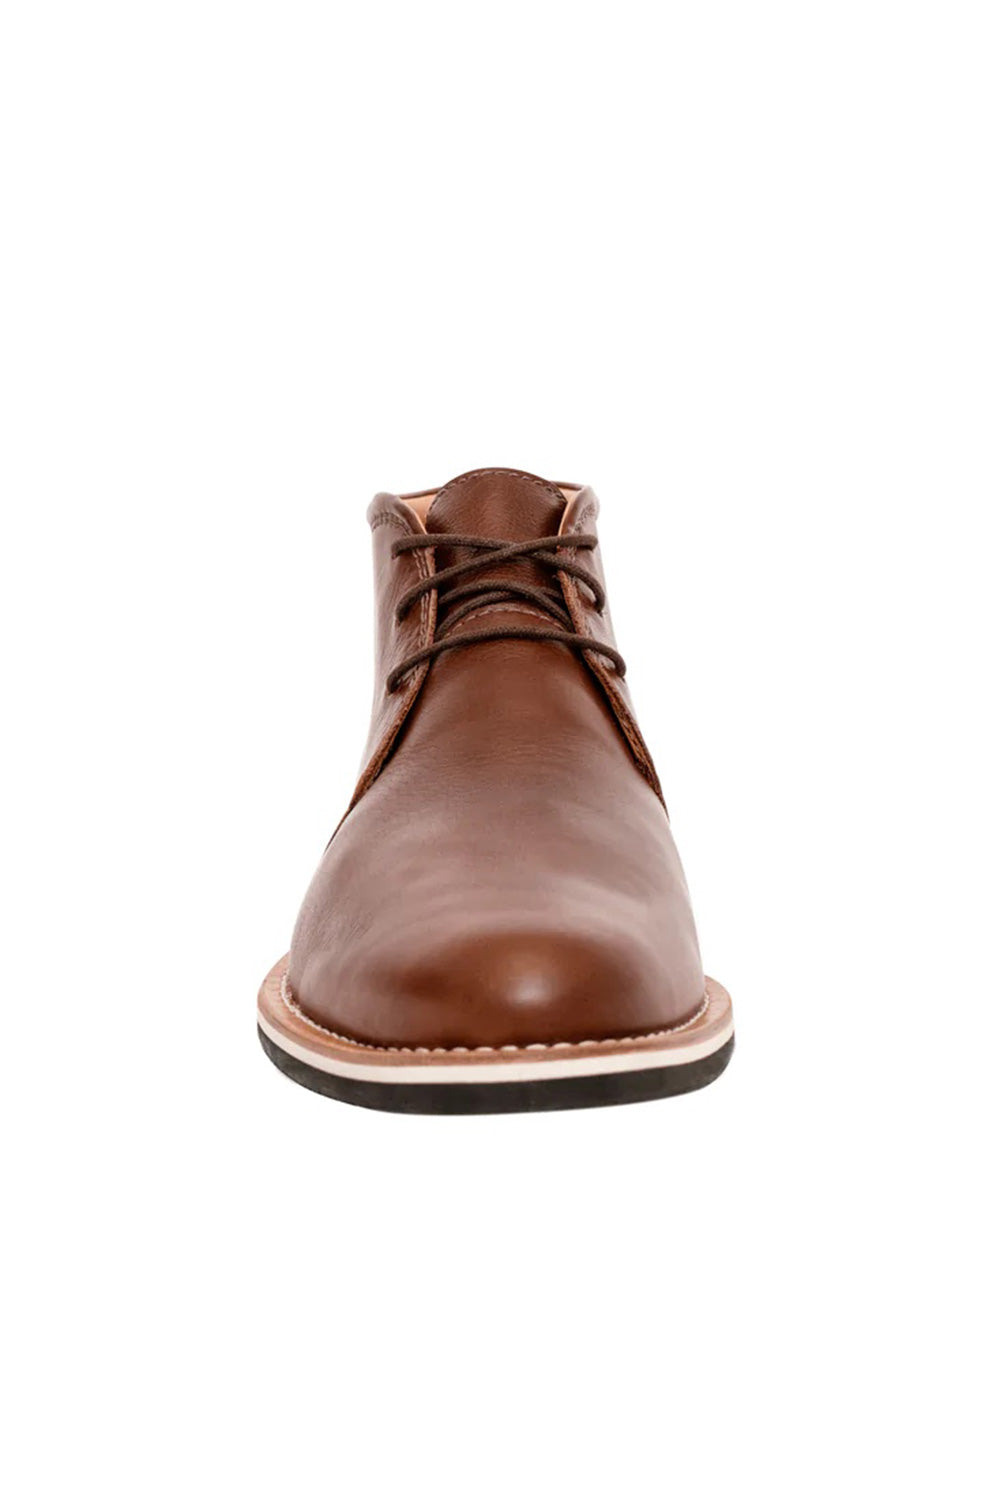 Helm Boots - The Hynes - Brown - Front